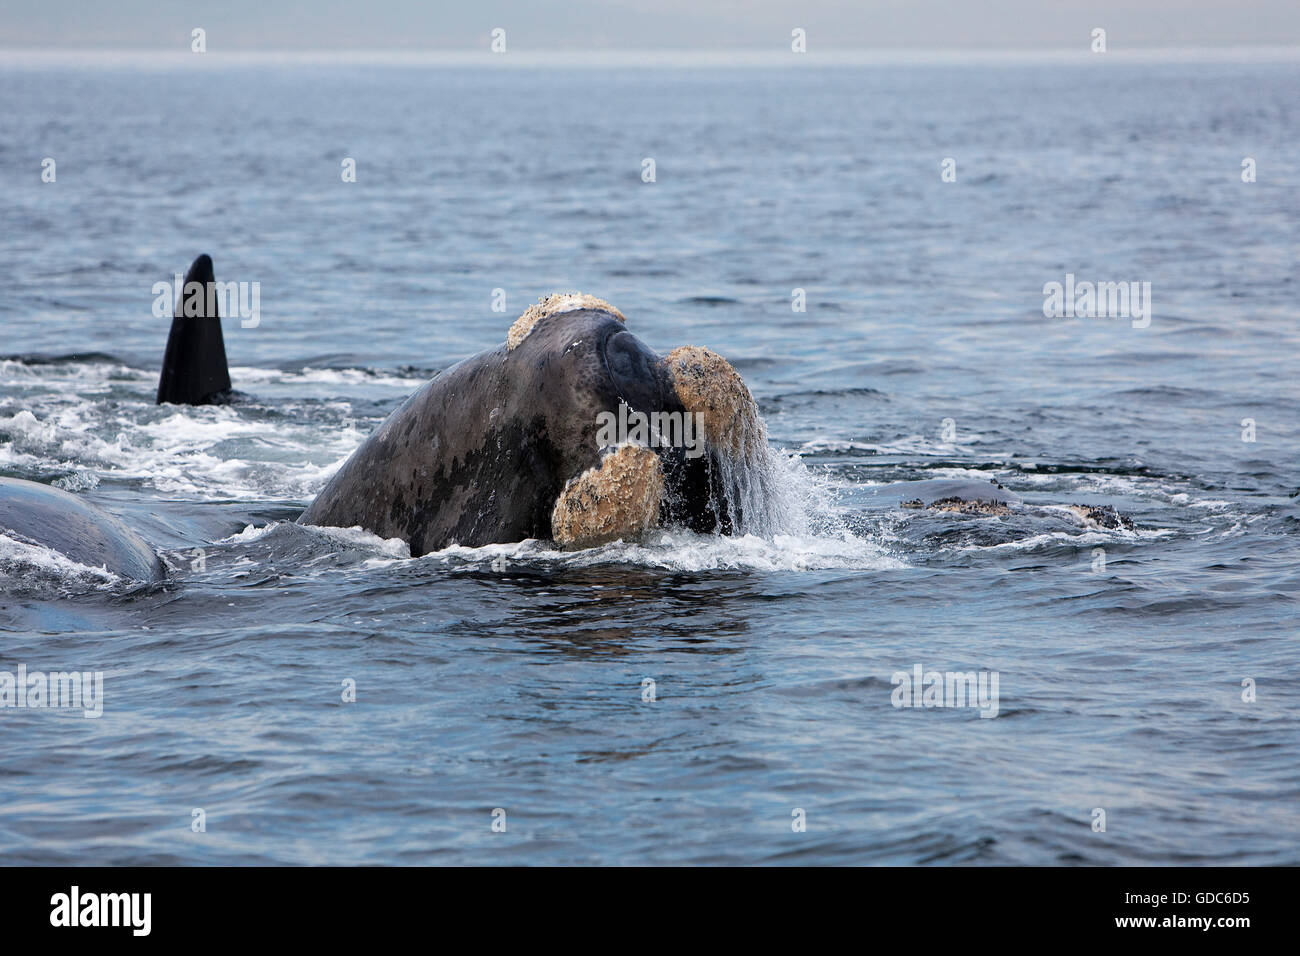 SOUTHERN RIGHT WHALE eubalaena australis, HEAD EMERGING FROM WATER, NEAR HERMANUS IN SOUTH AFRICA Stock Photo